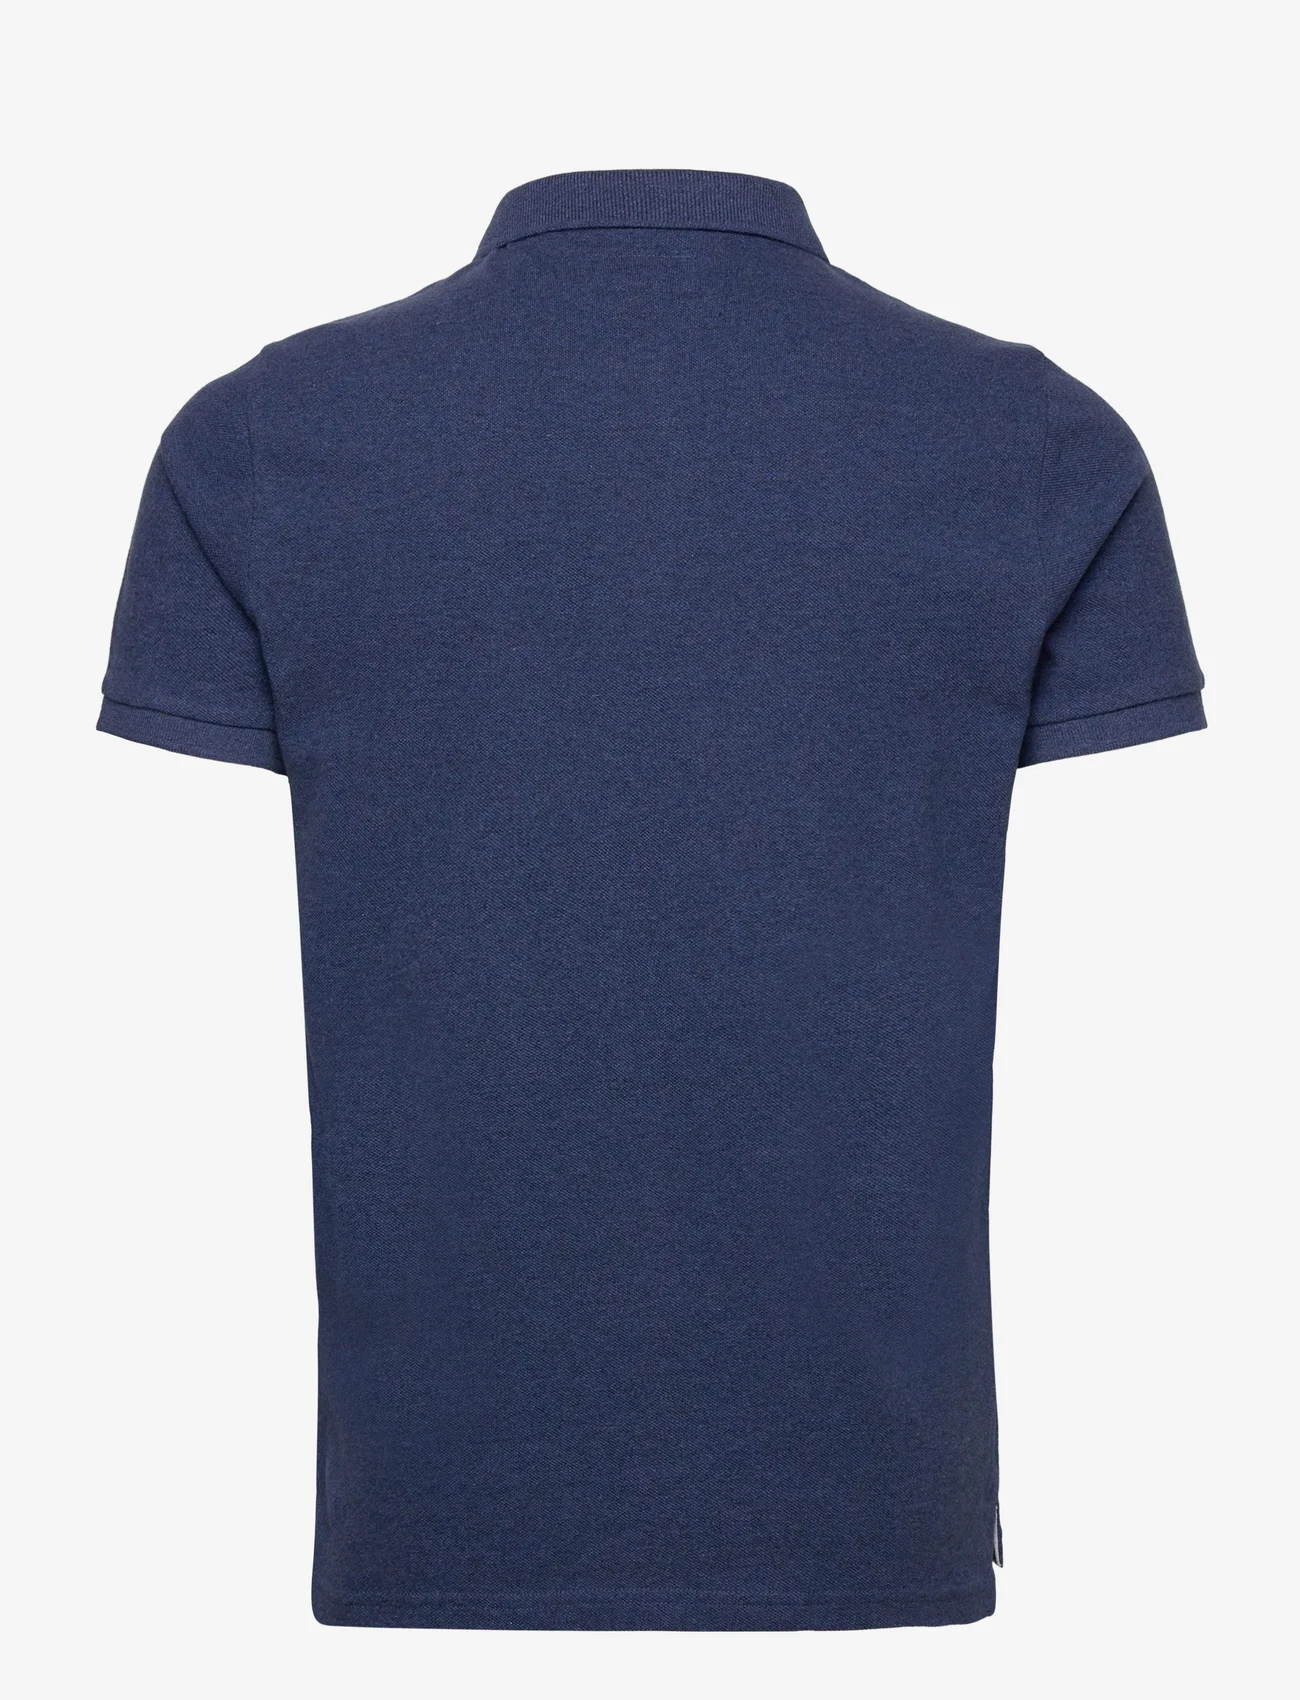 Superdry - CLASSIC PIQUE POLO - korte mouwen - bright blue marl - 1